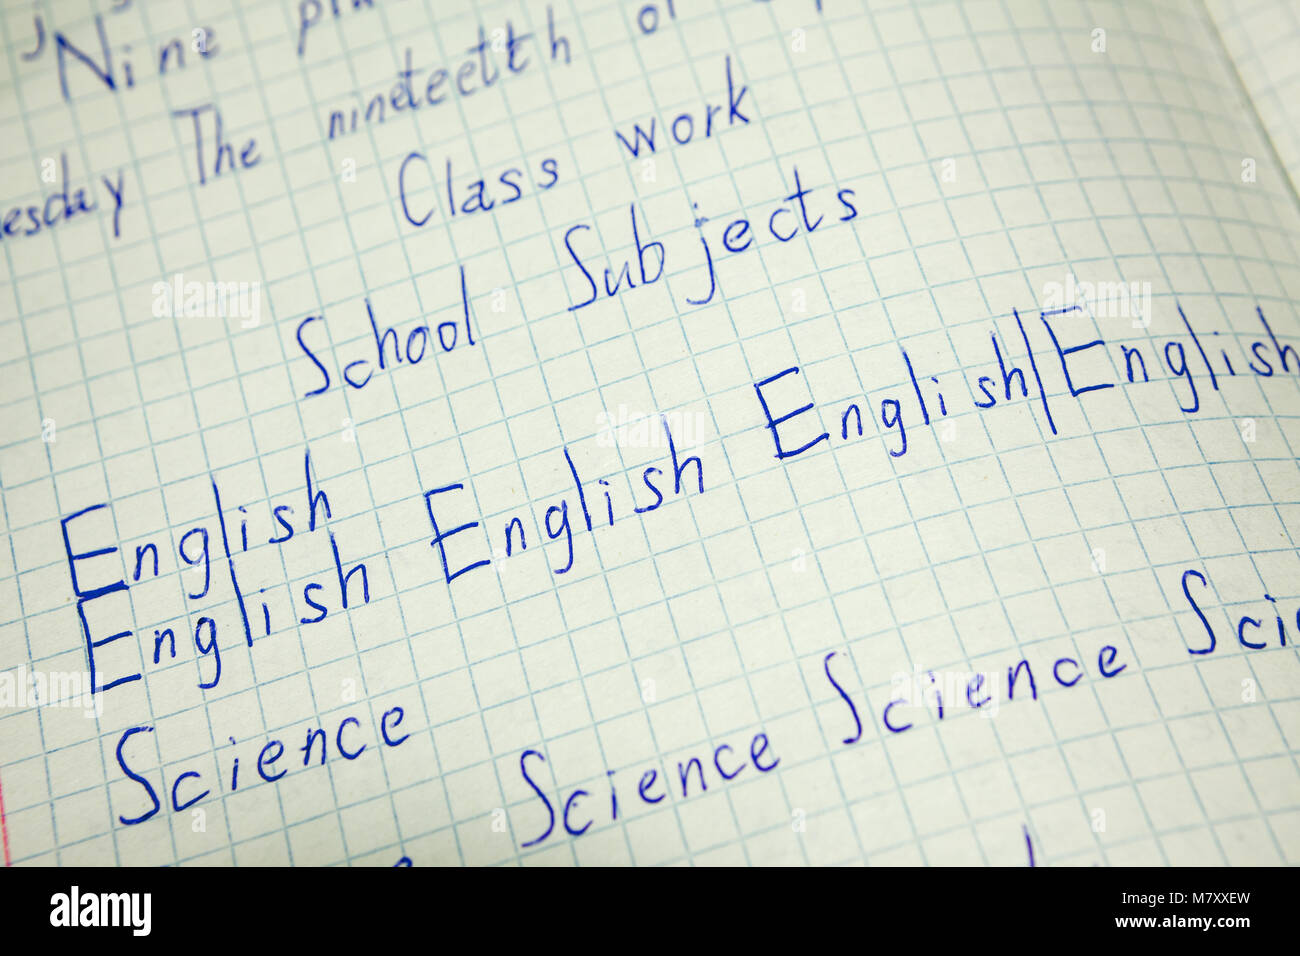 English education, vocabulary note-book with inscription English, science words Stock Photo